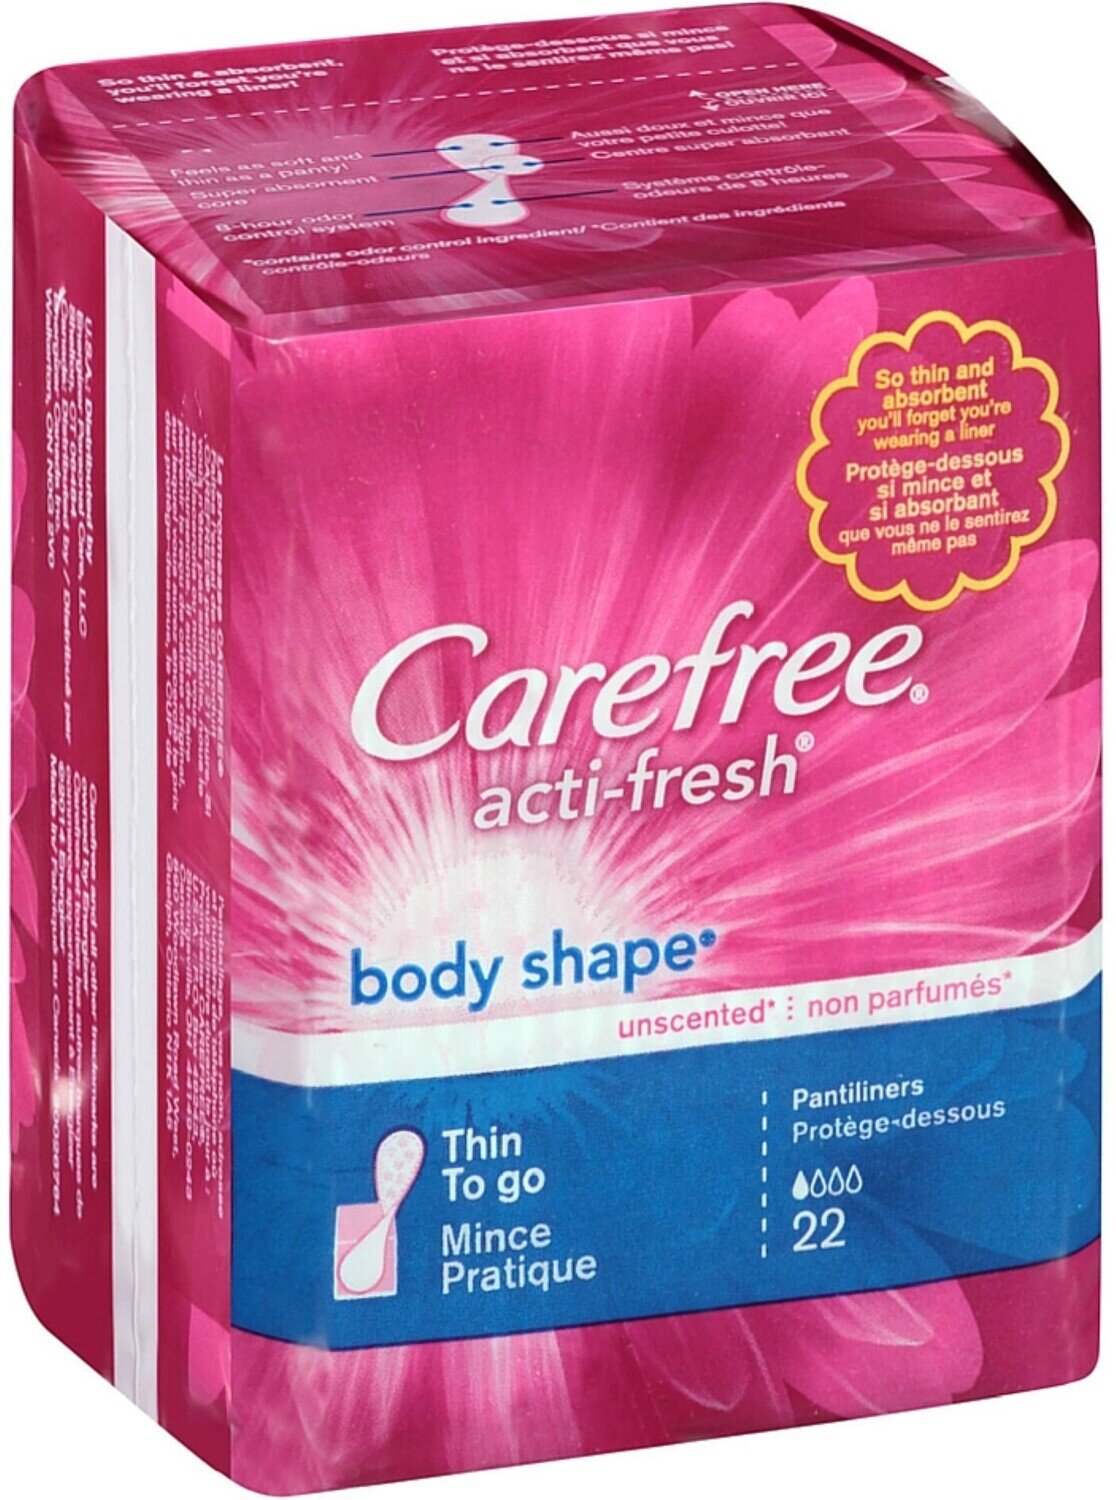 Carefree Acti-Fresh Perfectly Thin Daily Liners Unscented 22 ct